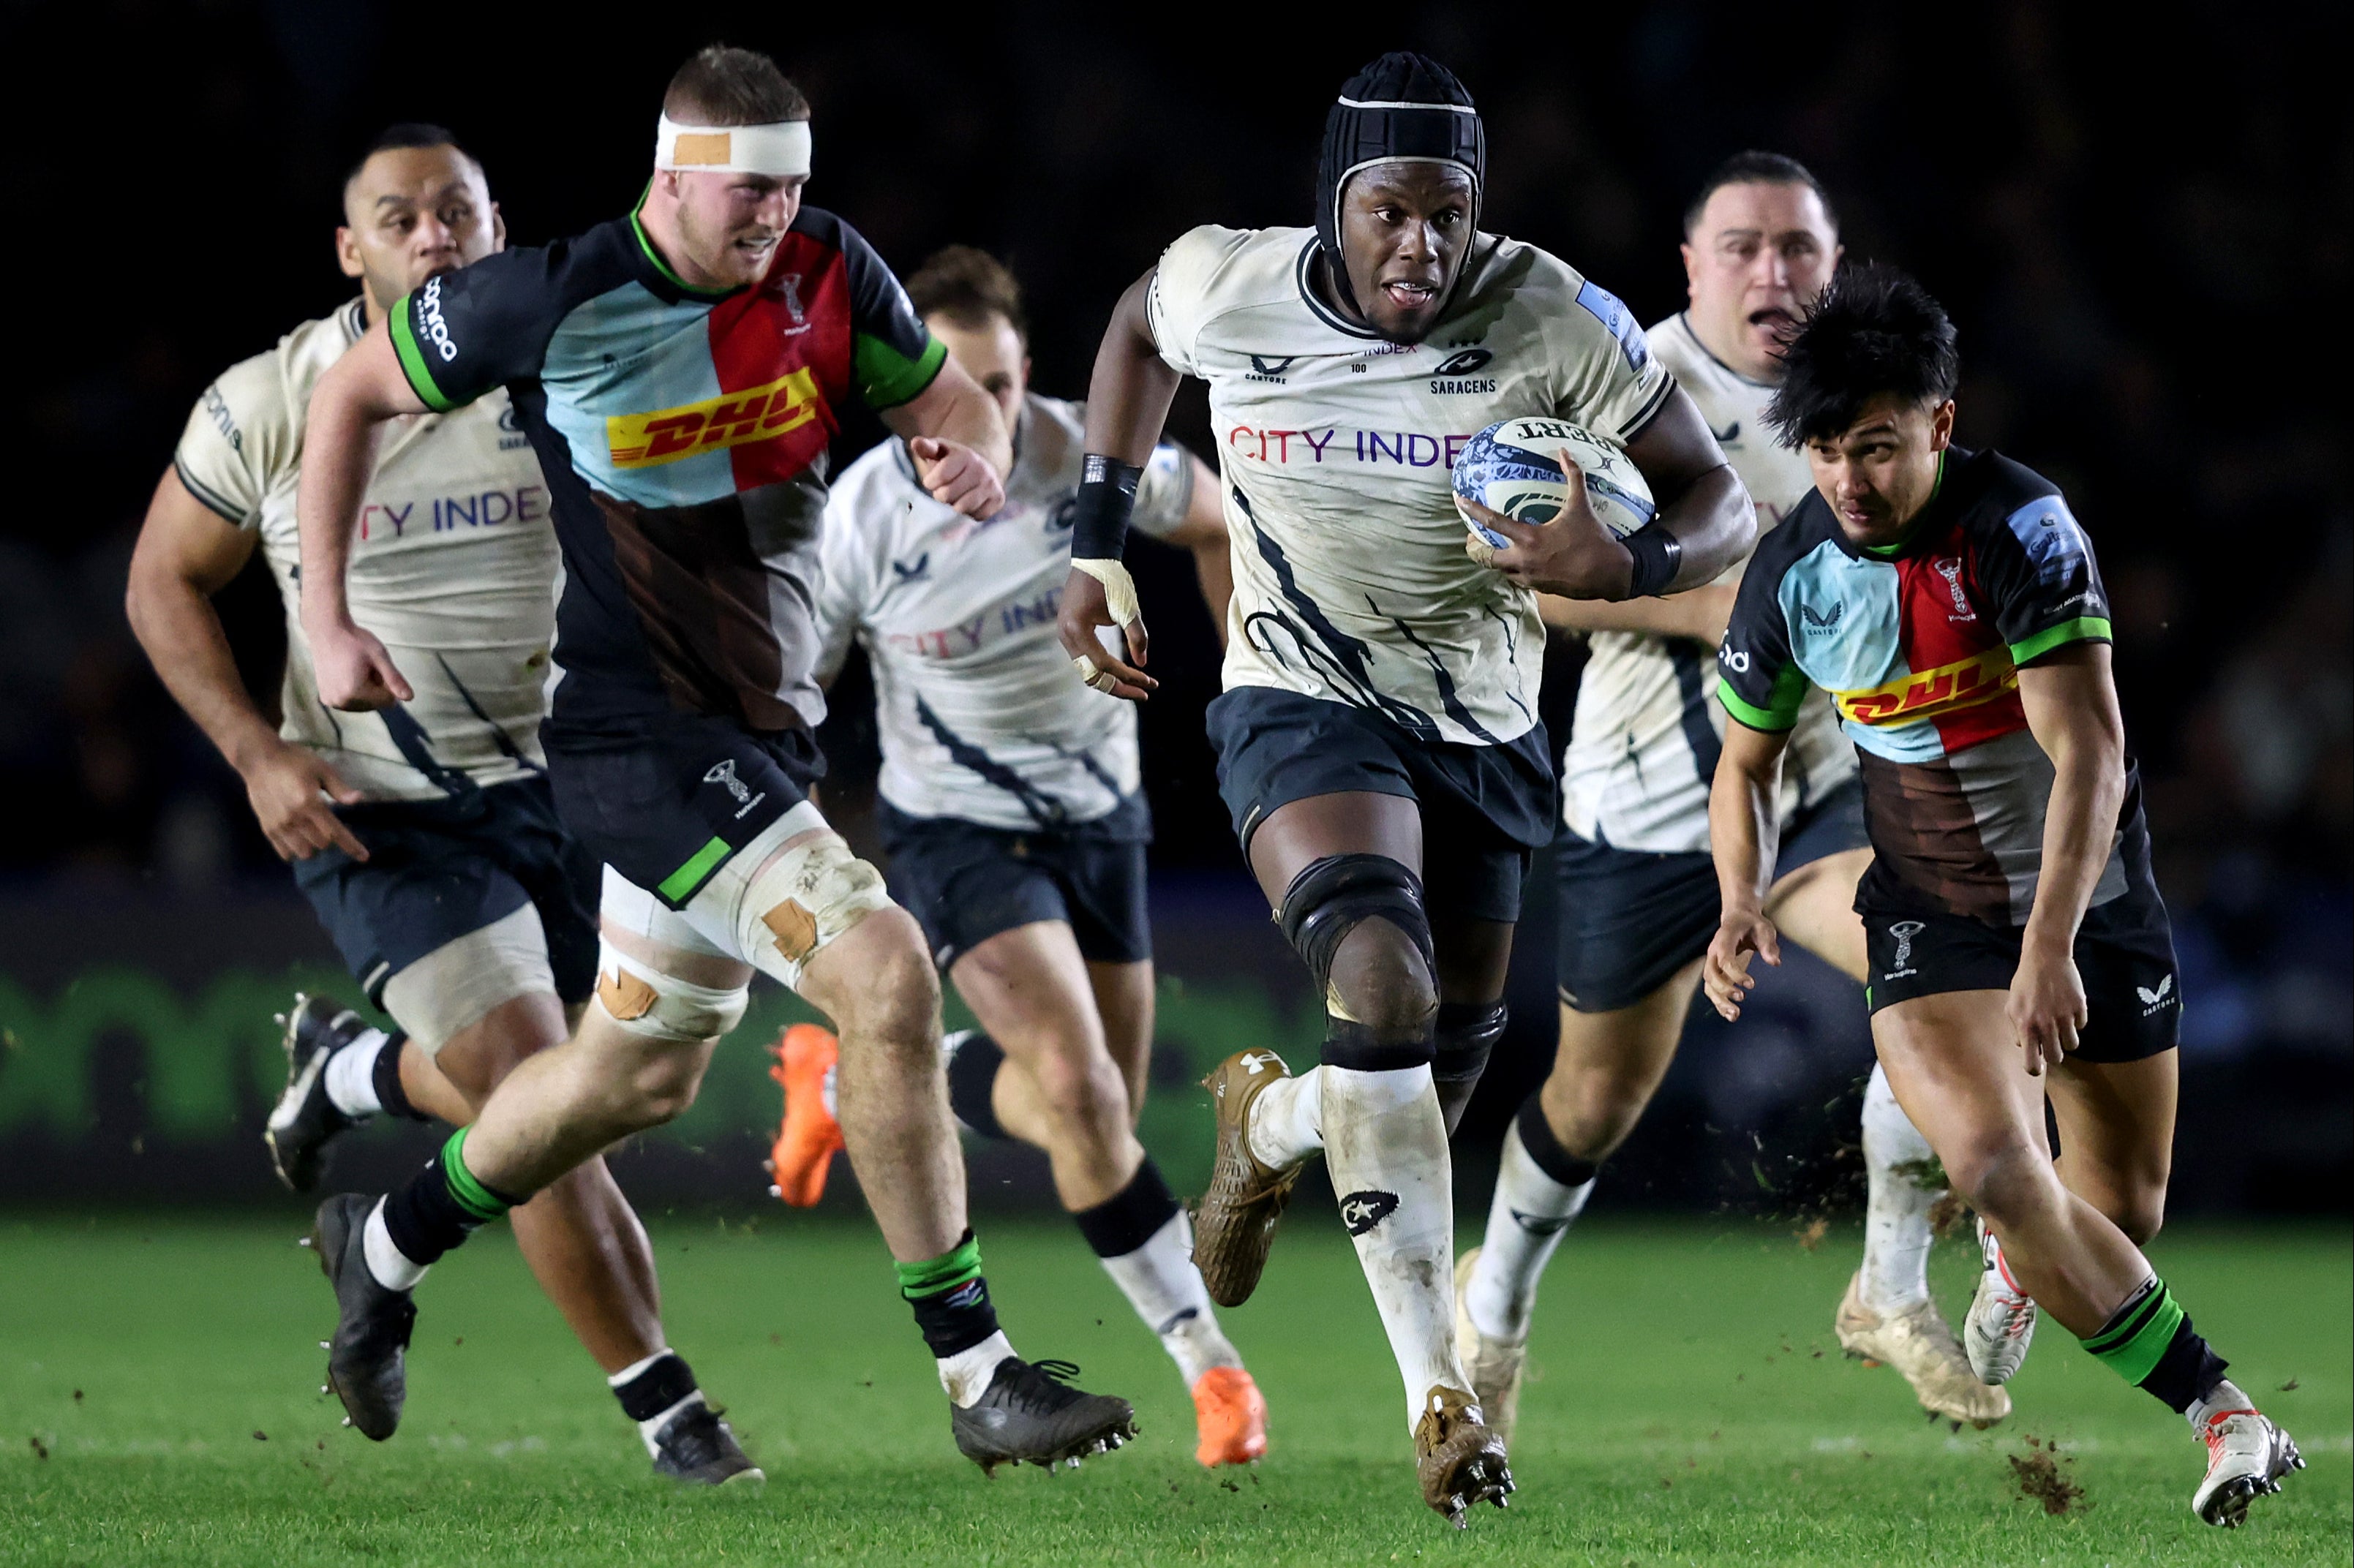 Maro Itoje has been back to his best for Saracens